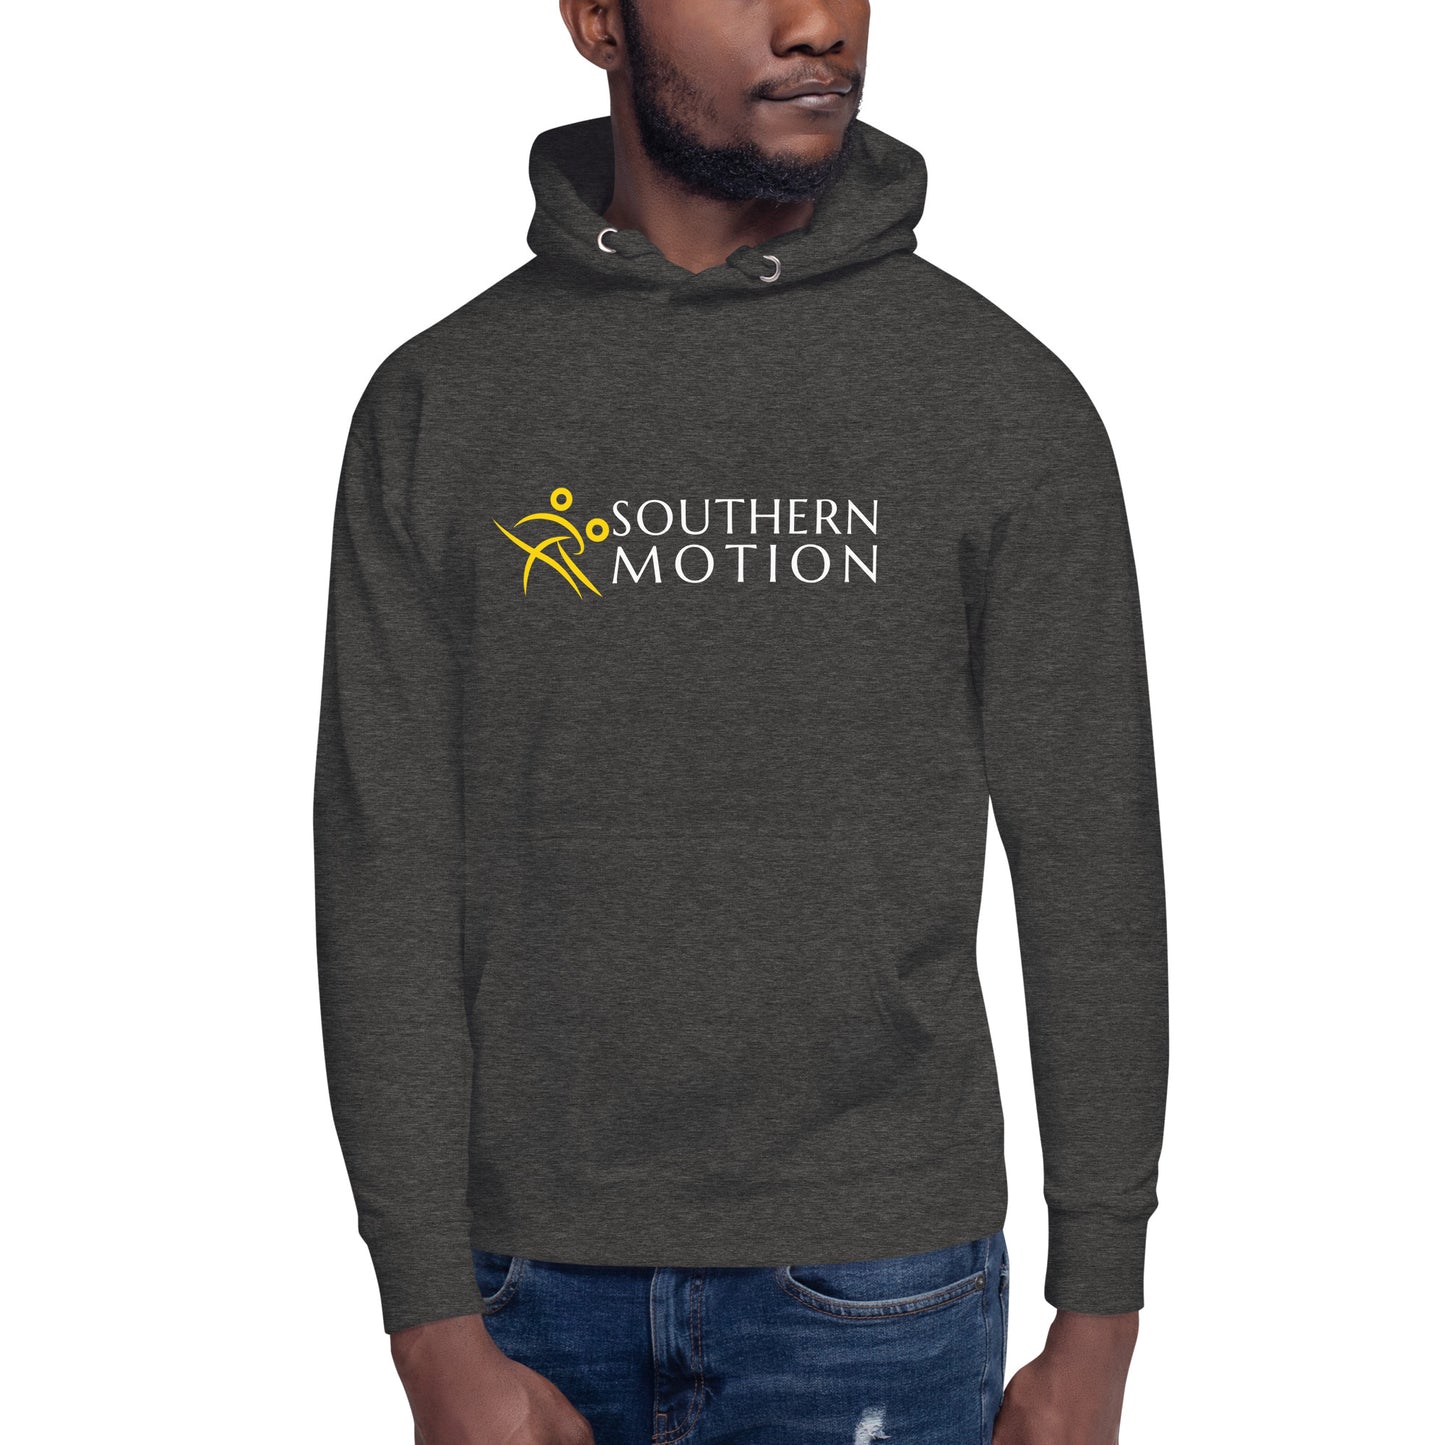 Southern Motion Unisex Hoodie